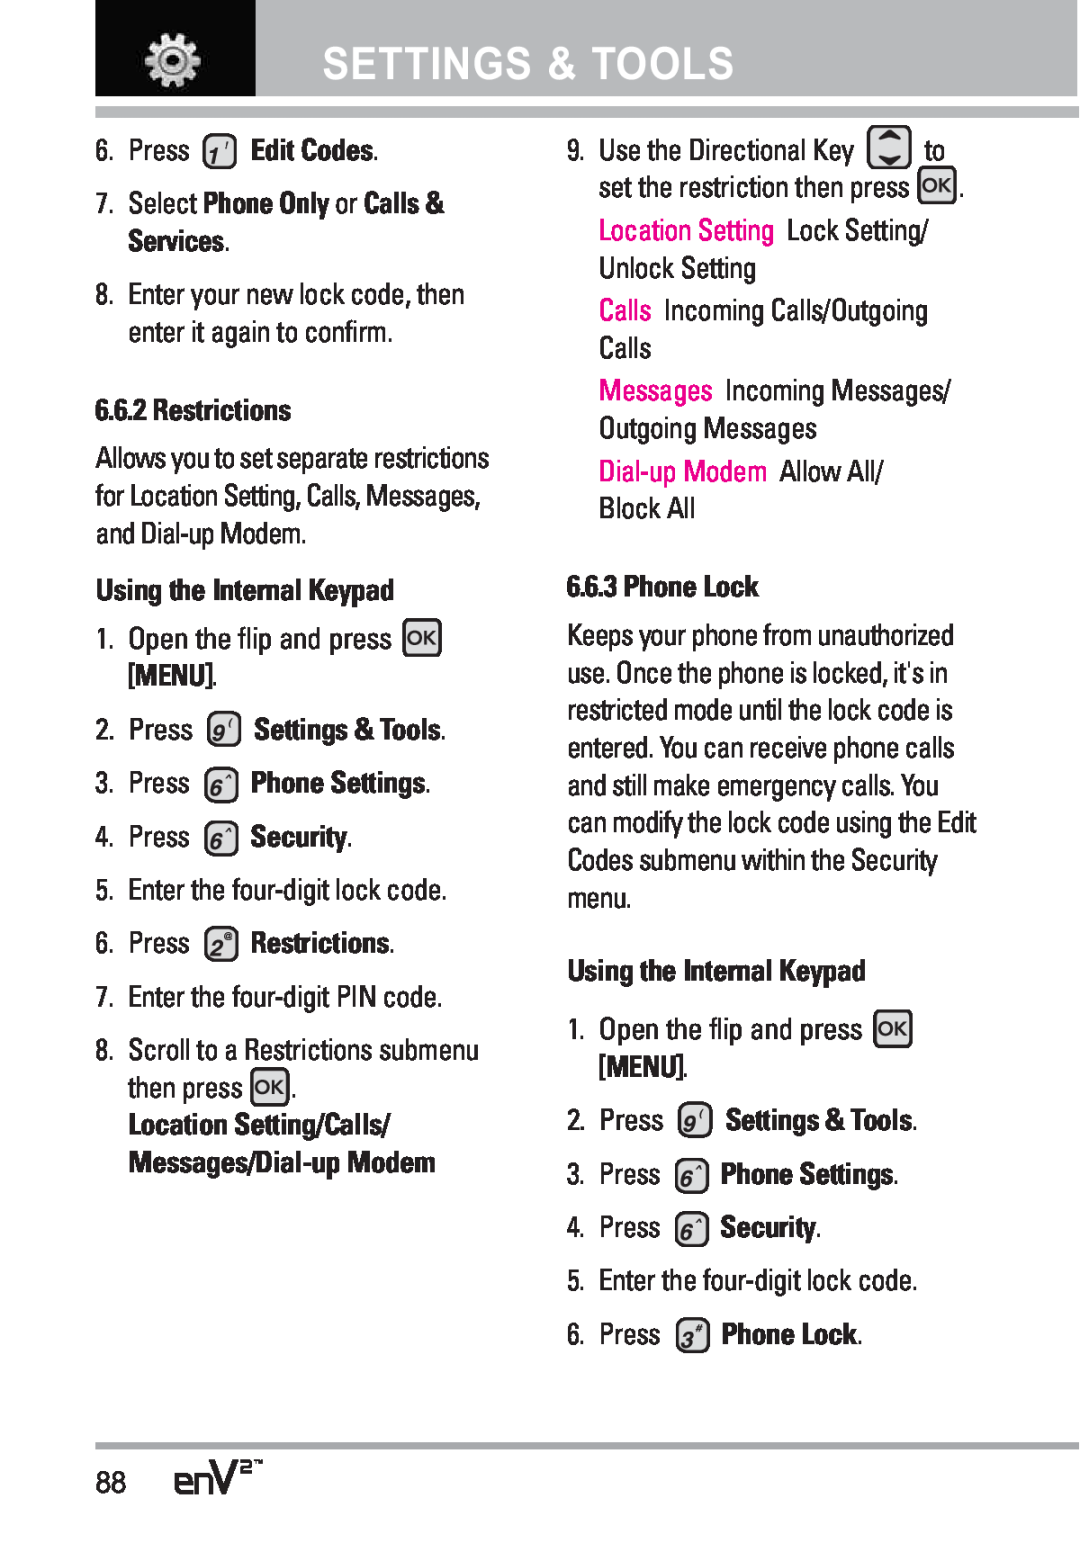 LG Electronics EnV2 Settings & Tools, Press Edit Codes 7. Select Phone Only or Calls & Services, Restrictions, Phone Lock 